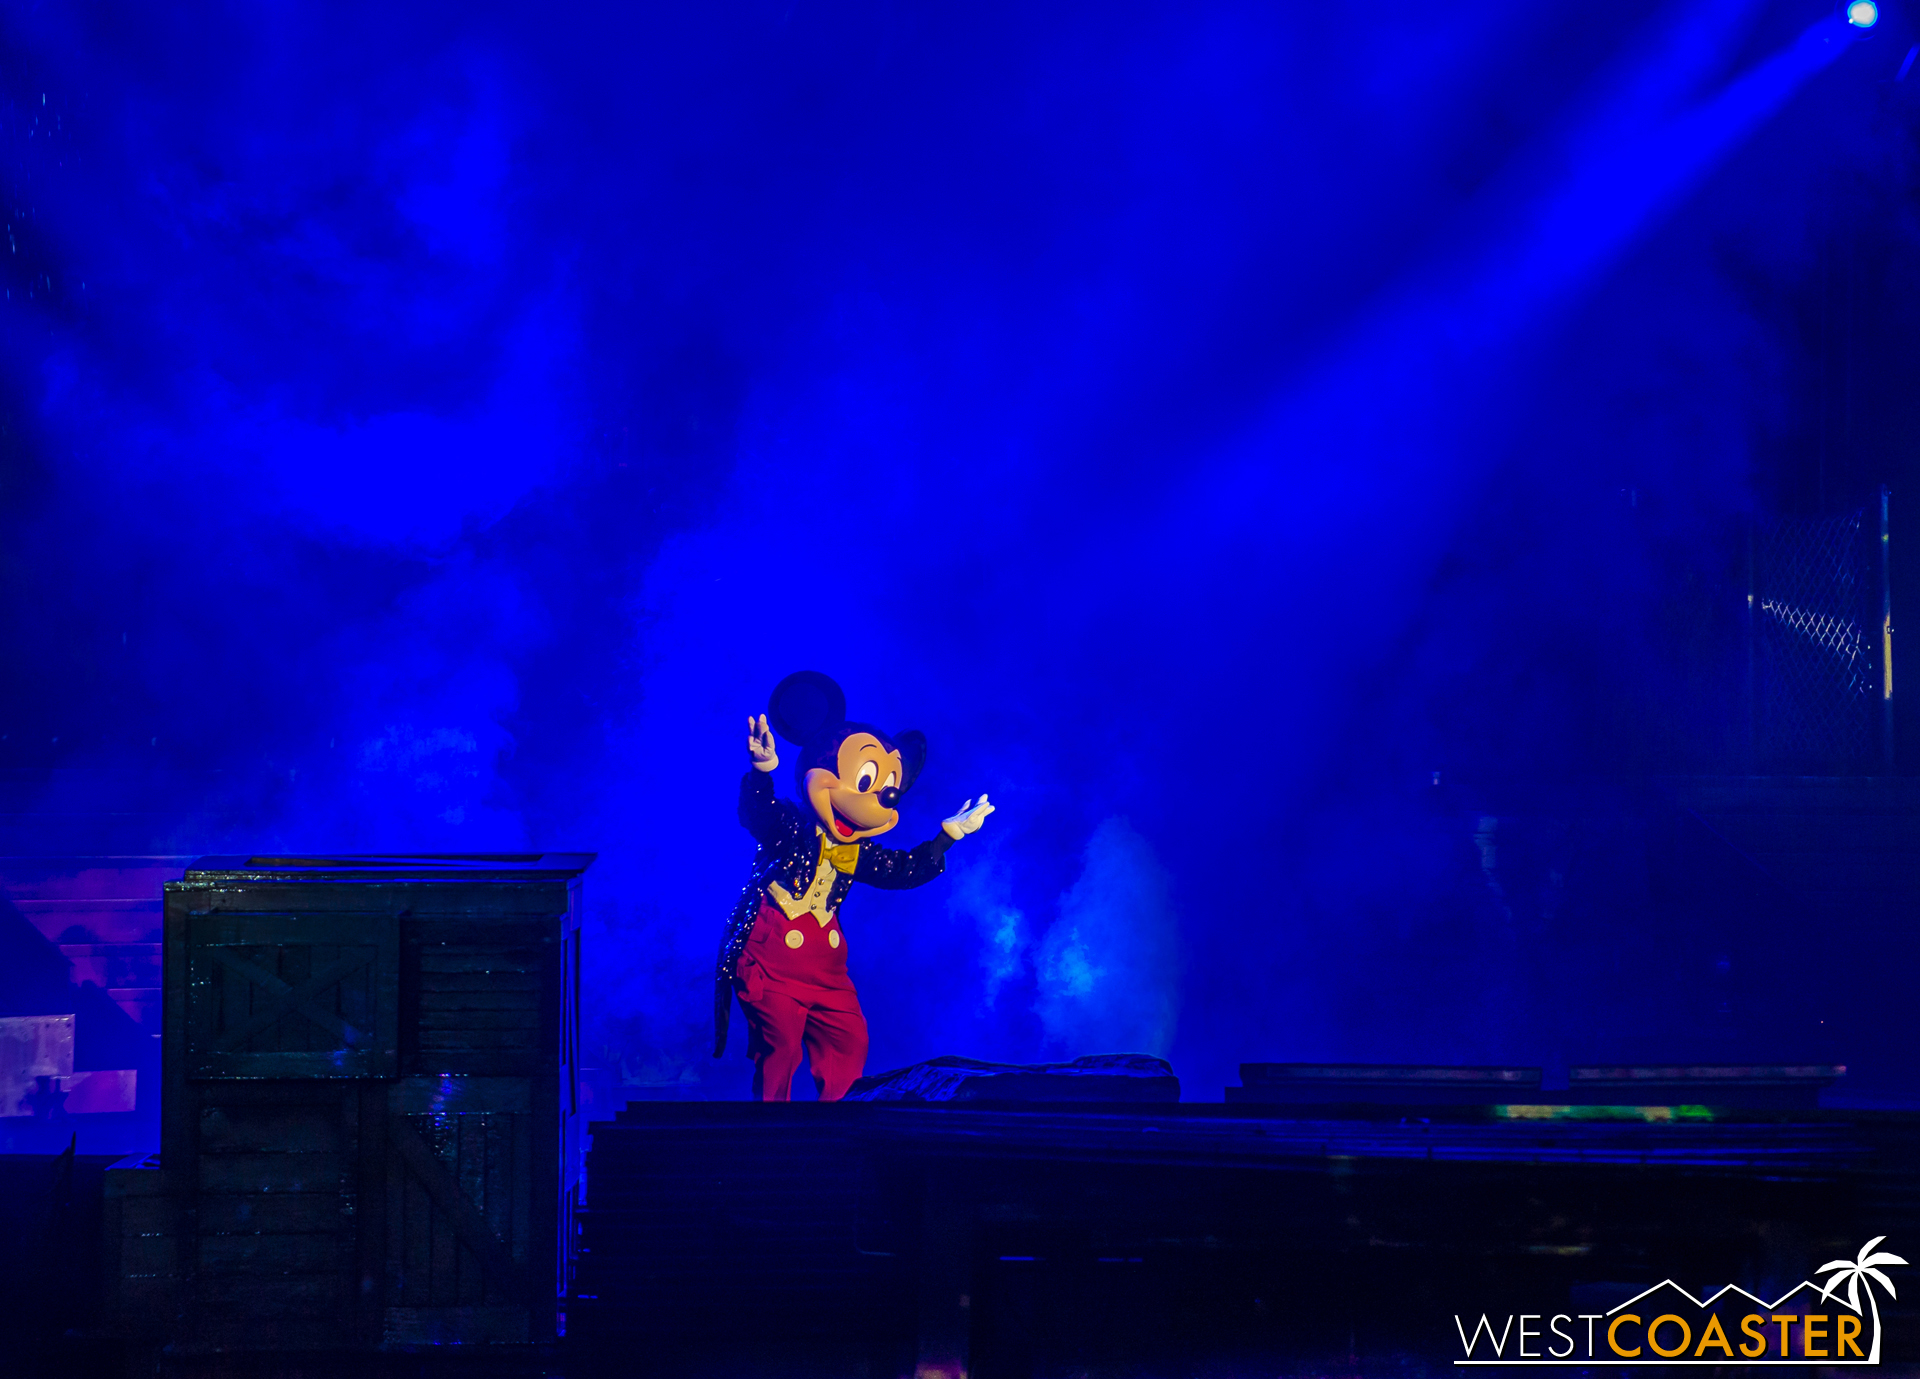  Of course, everything comes to a head when Sorcerer Mickey disappears from the top of the roof and reappears as regular Mickey. 